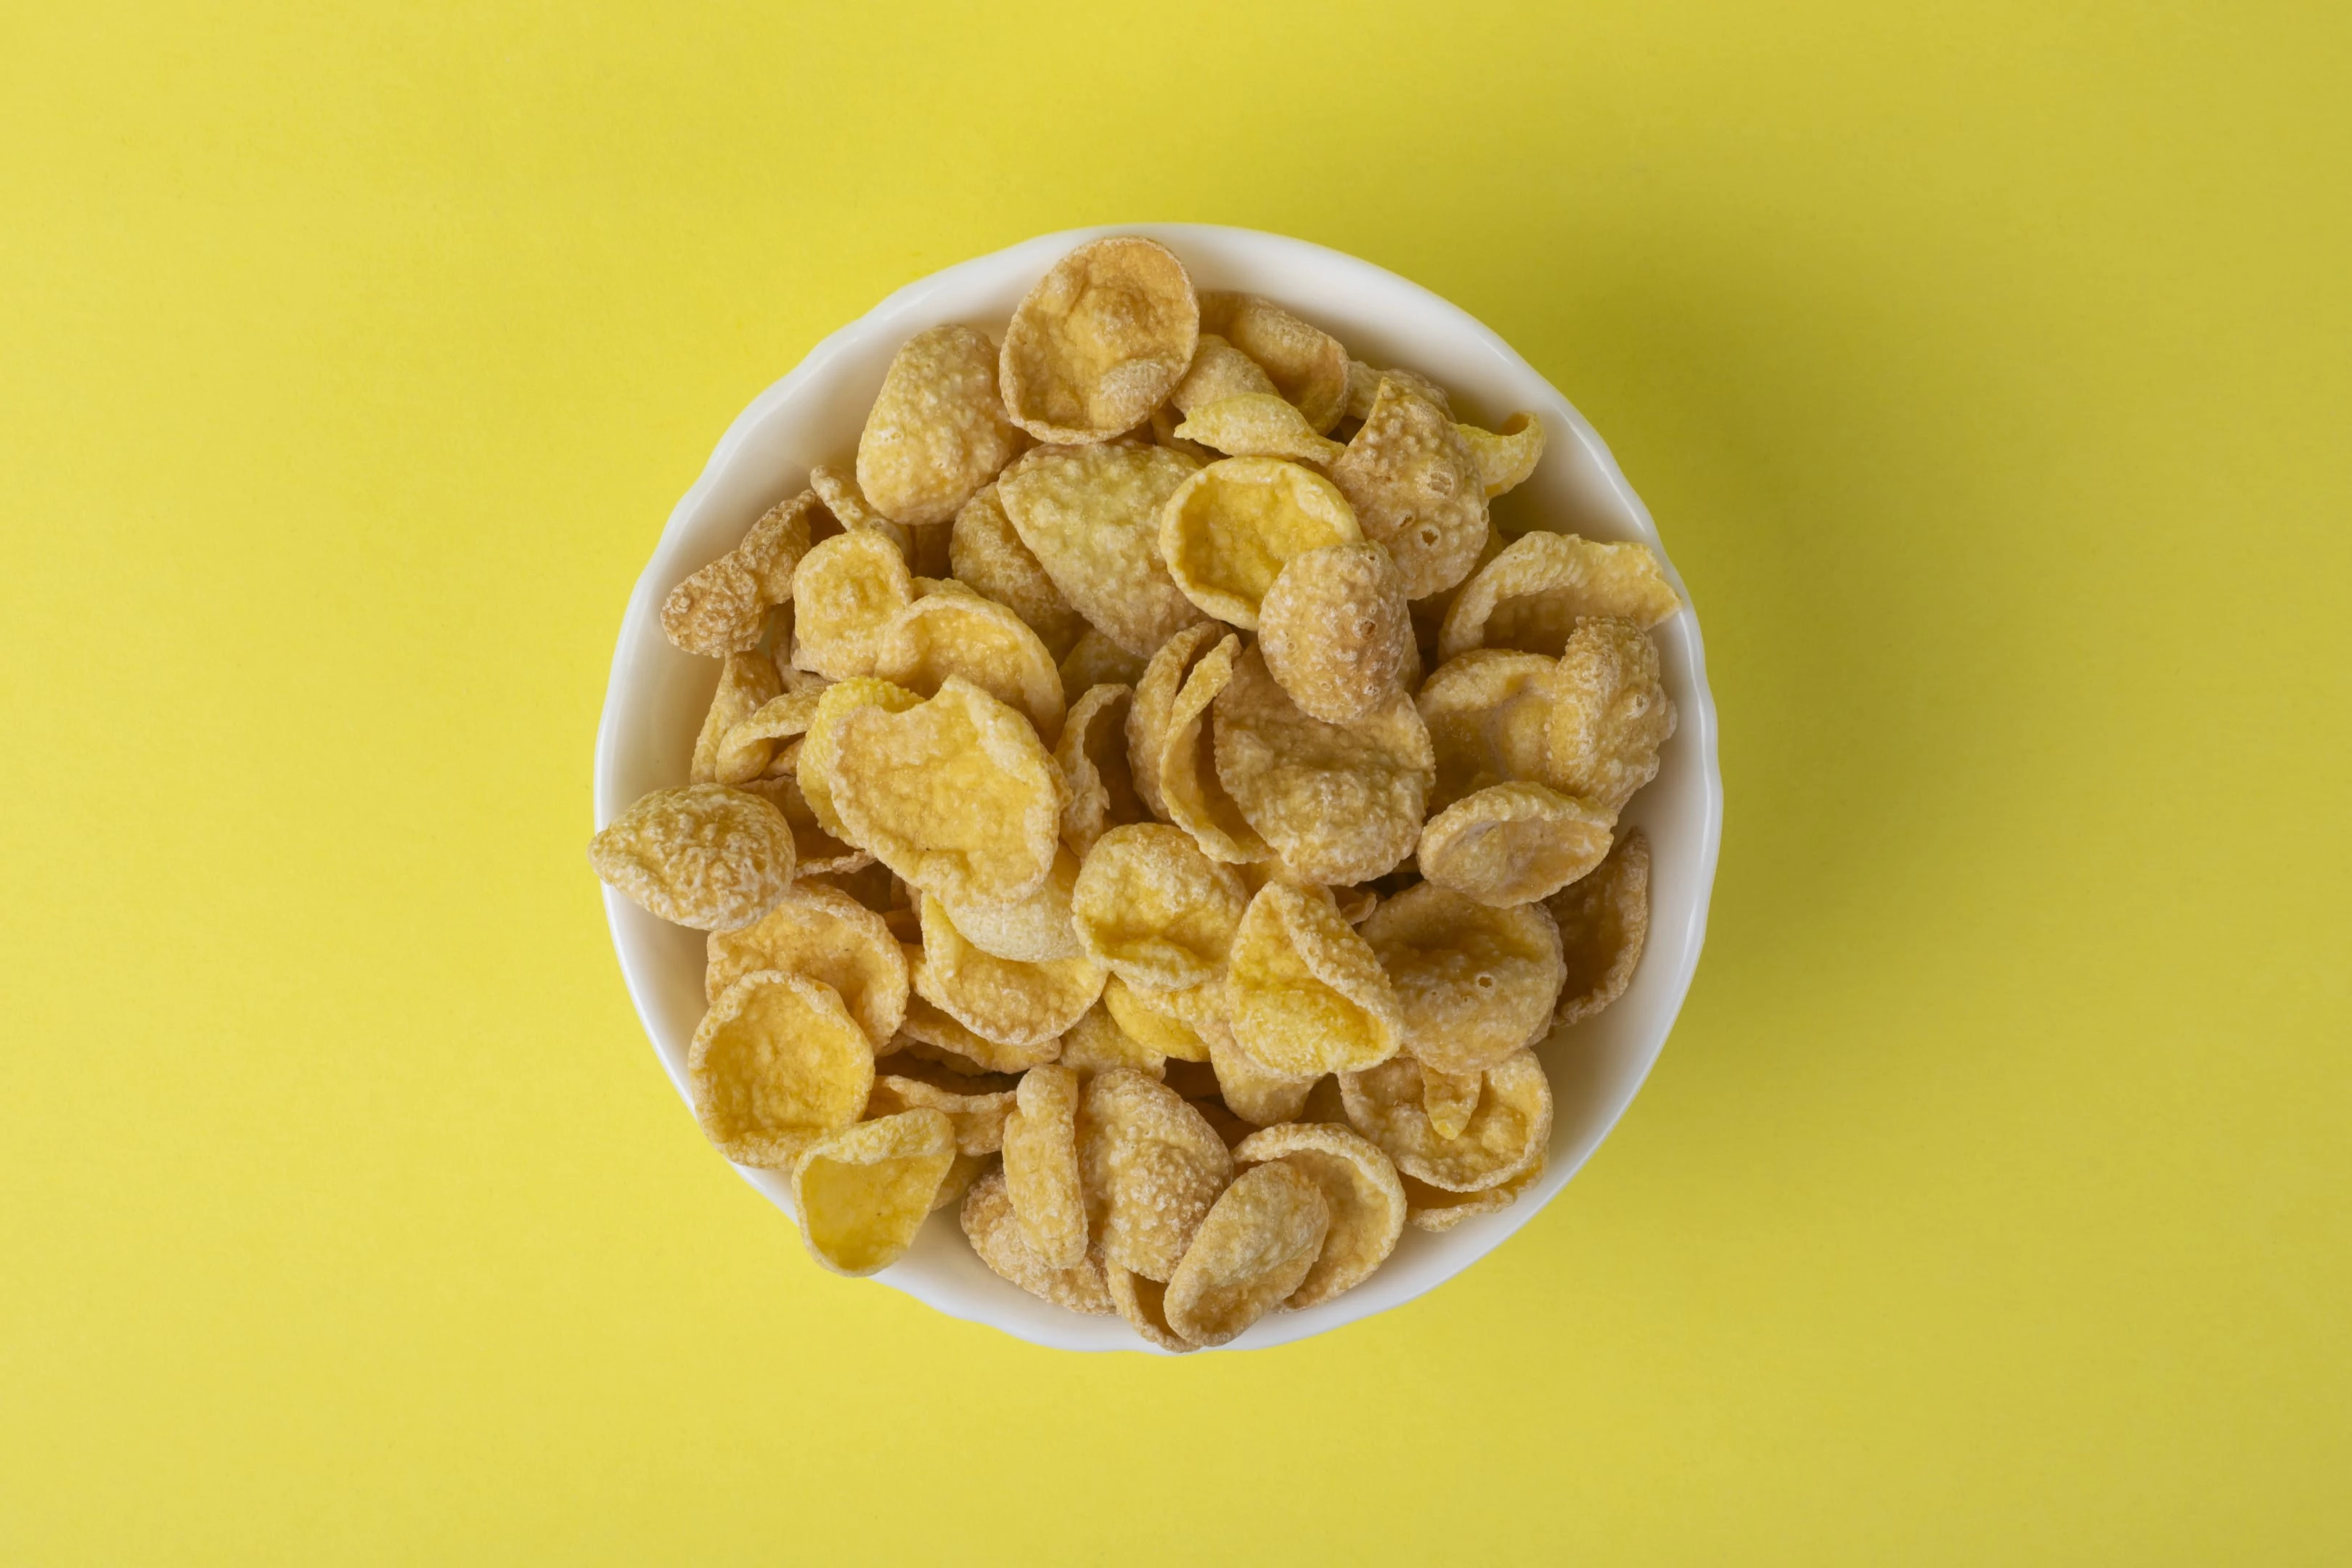 Bowl of Cornflakes on Yellow Table